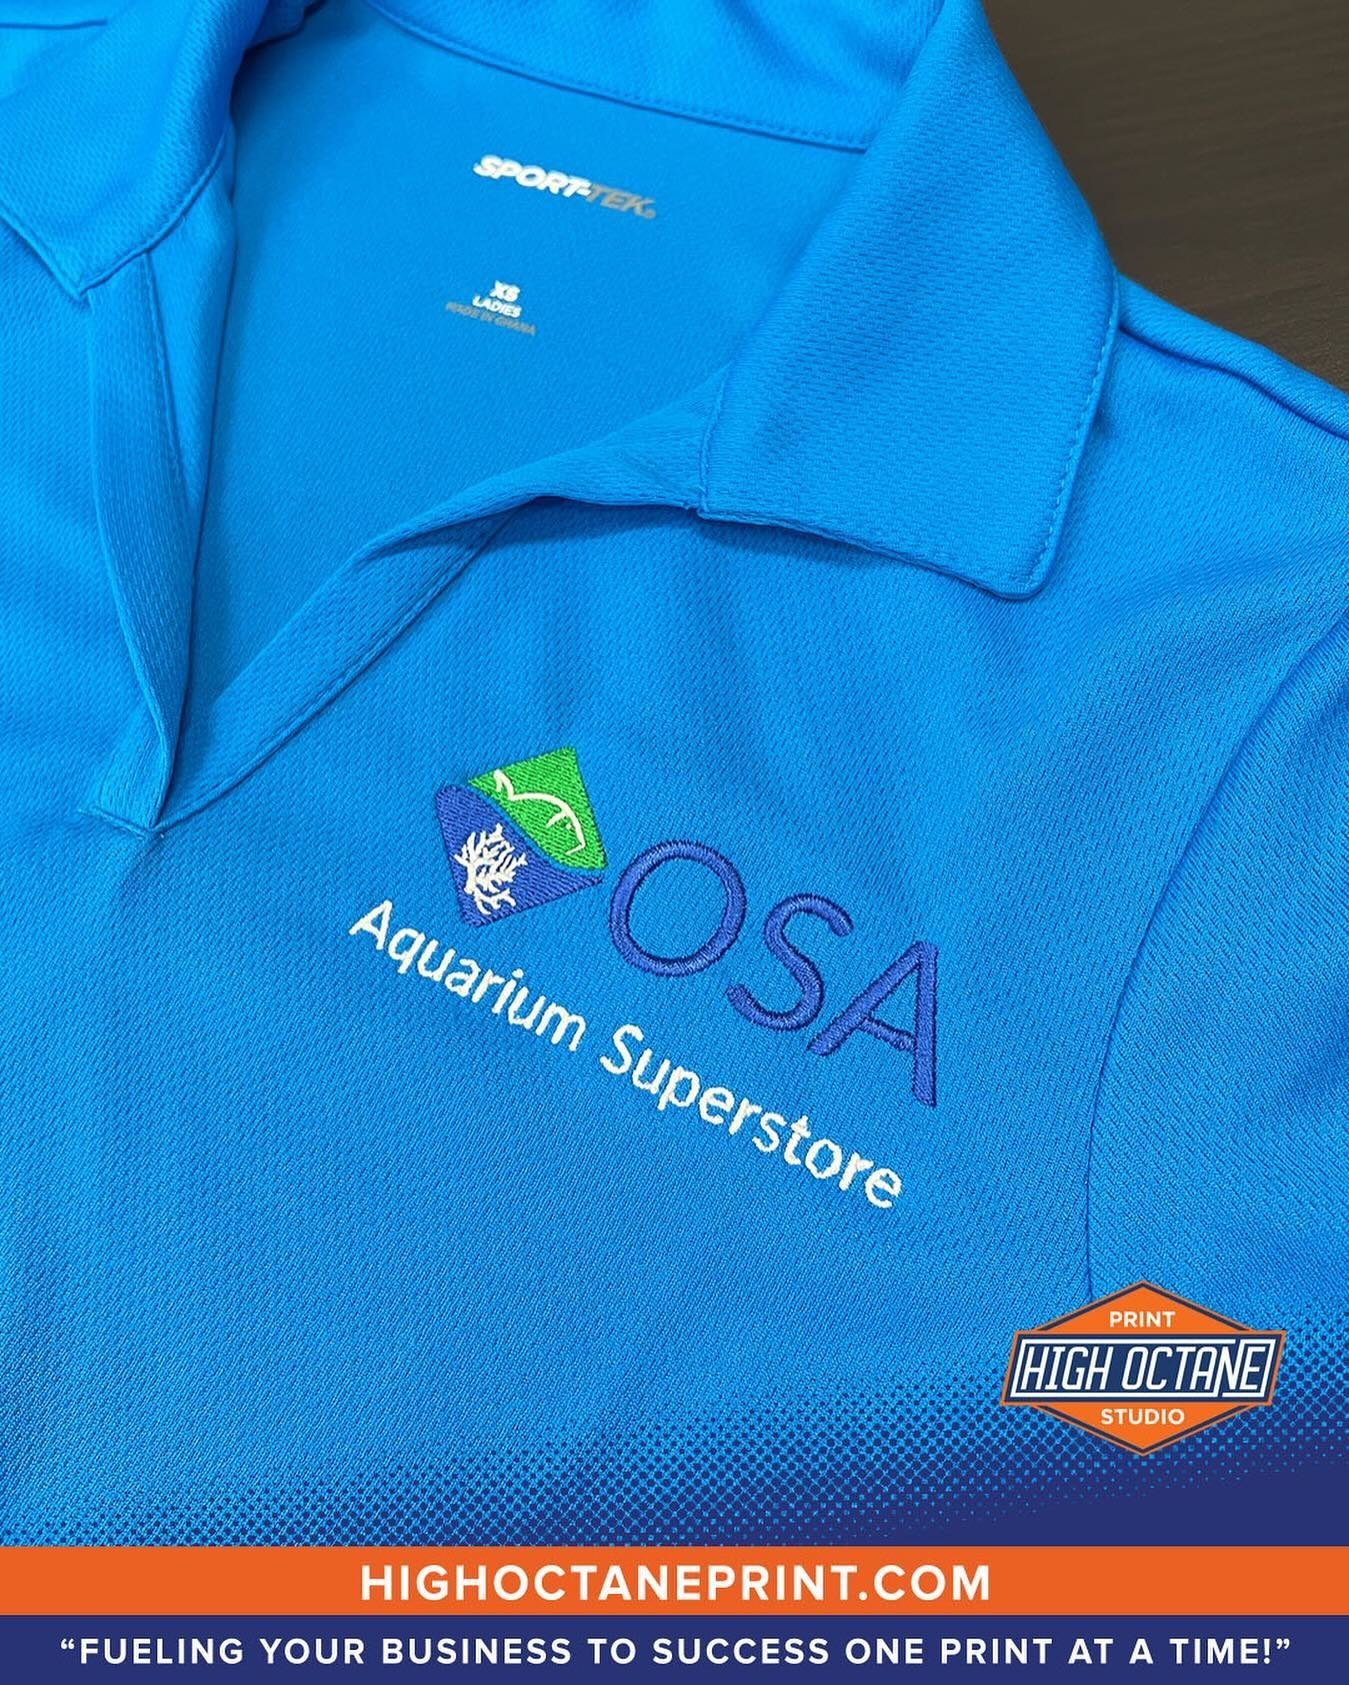 The crew at @osa.media is looking sharp in their new &ldquo;Pond Blue&rdquo; polos!🪼

Be sure to check them out for all your aquatic needs!🐠🪷

High Octane Print Studio 
sales@highoctaneprint.com 
📍931 Main St. Coventry RI